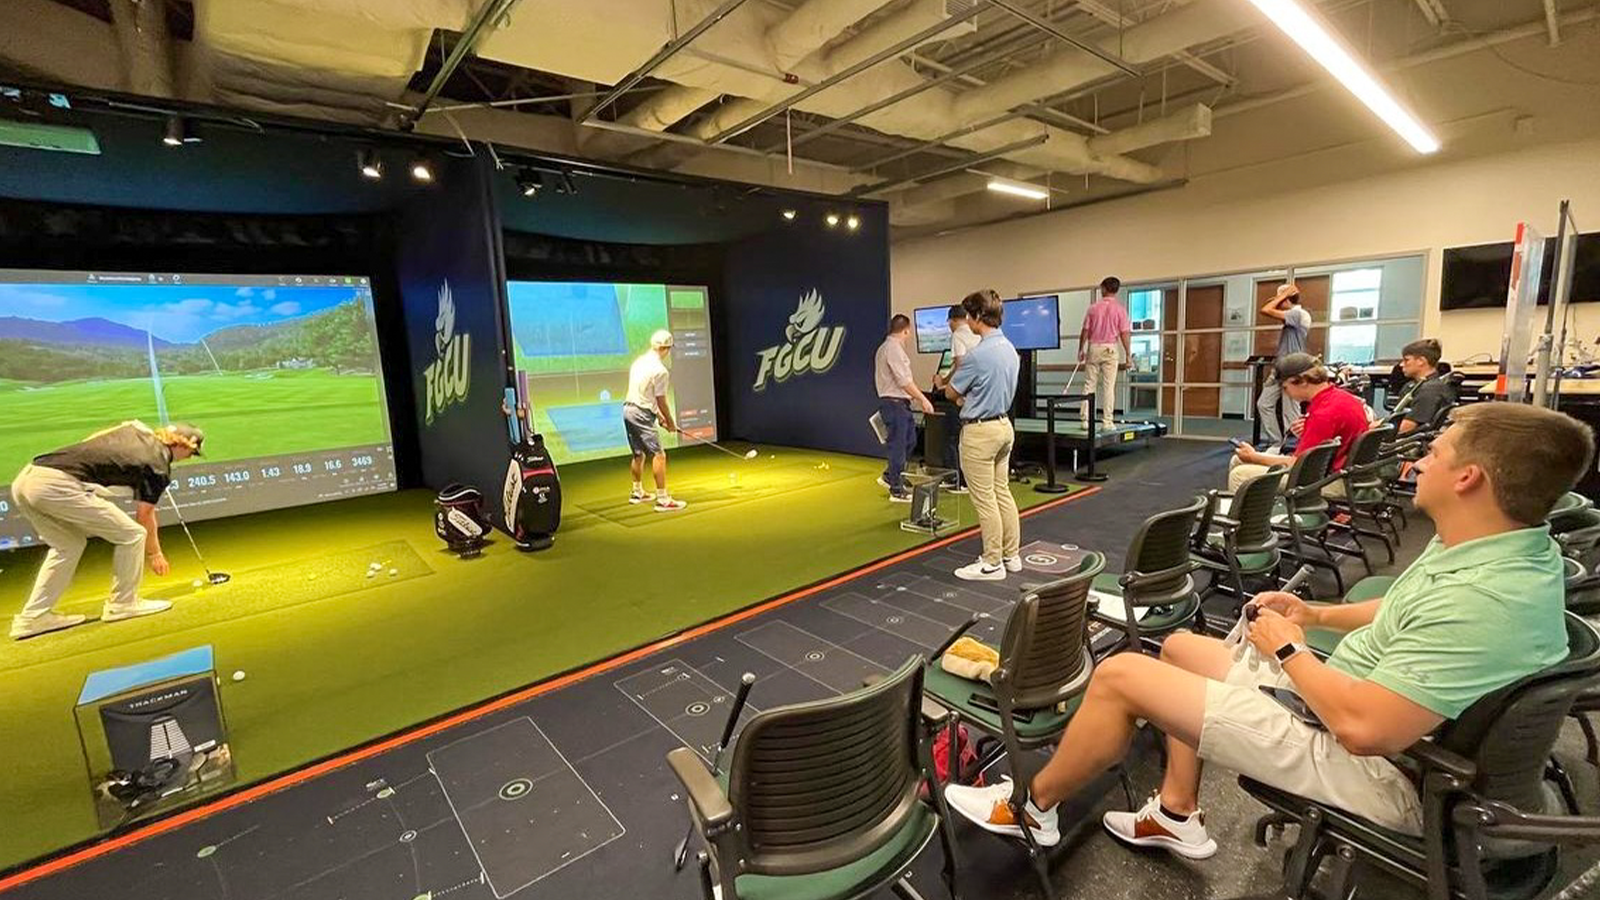 Students spending time in the newly renovated FGCU PGM Swing Lab.